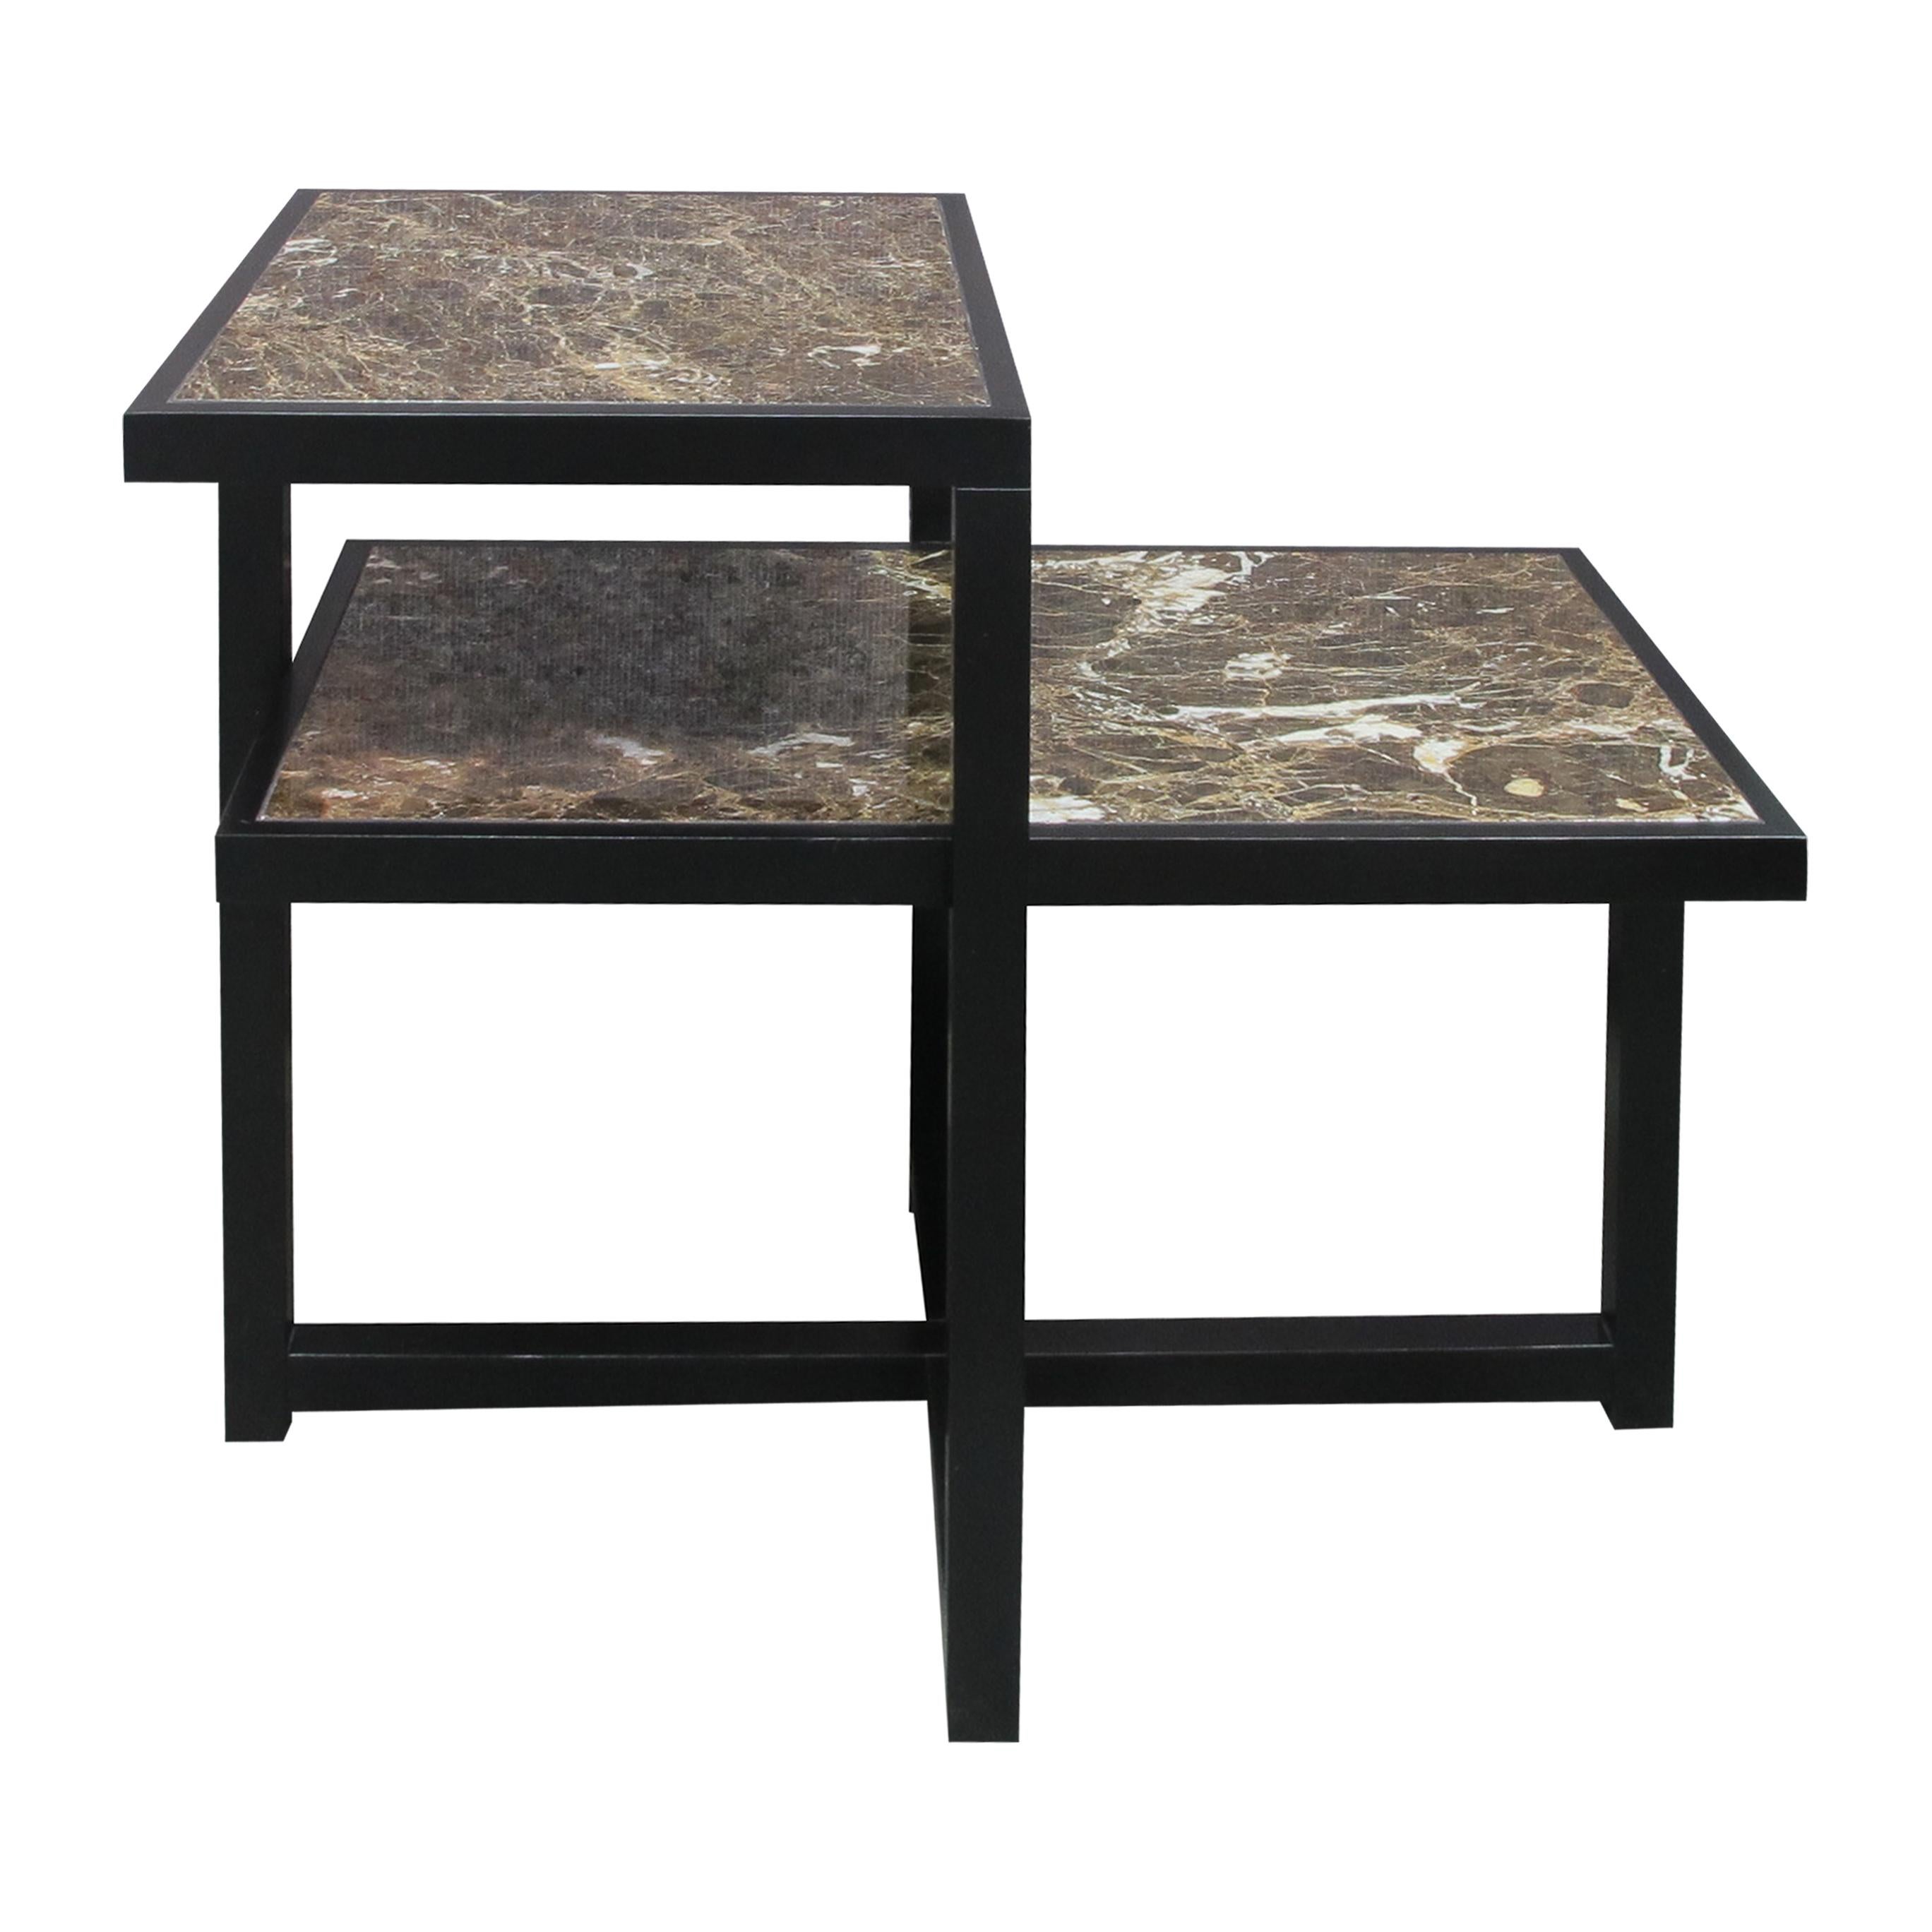 Mid-Century Modern Pair of 1960s Italian Two-Tiered Side Tables with Marrón Emperador Marble Top